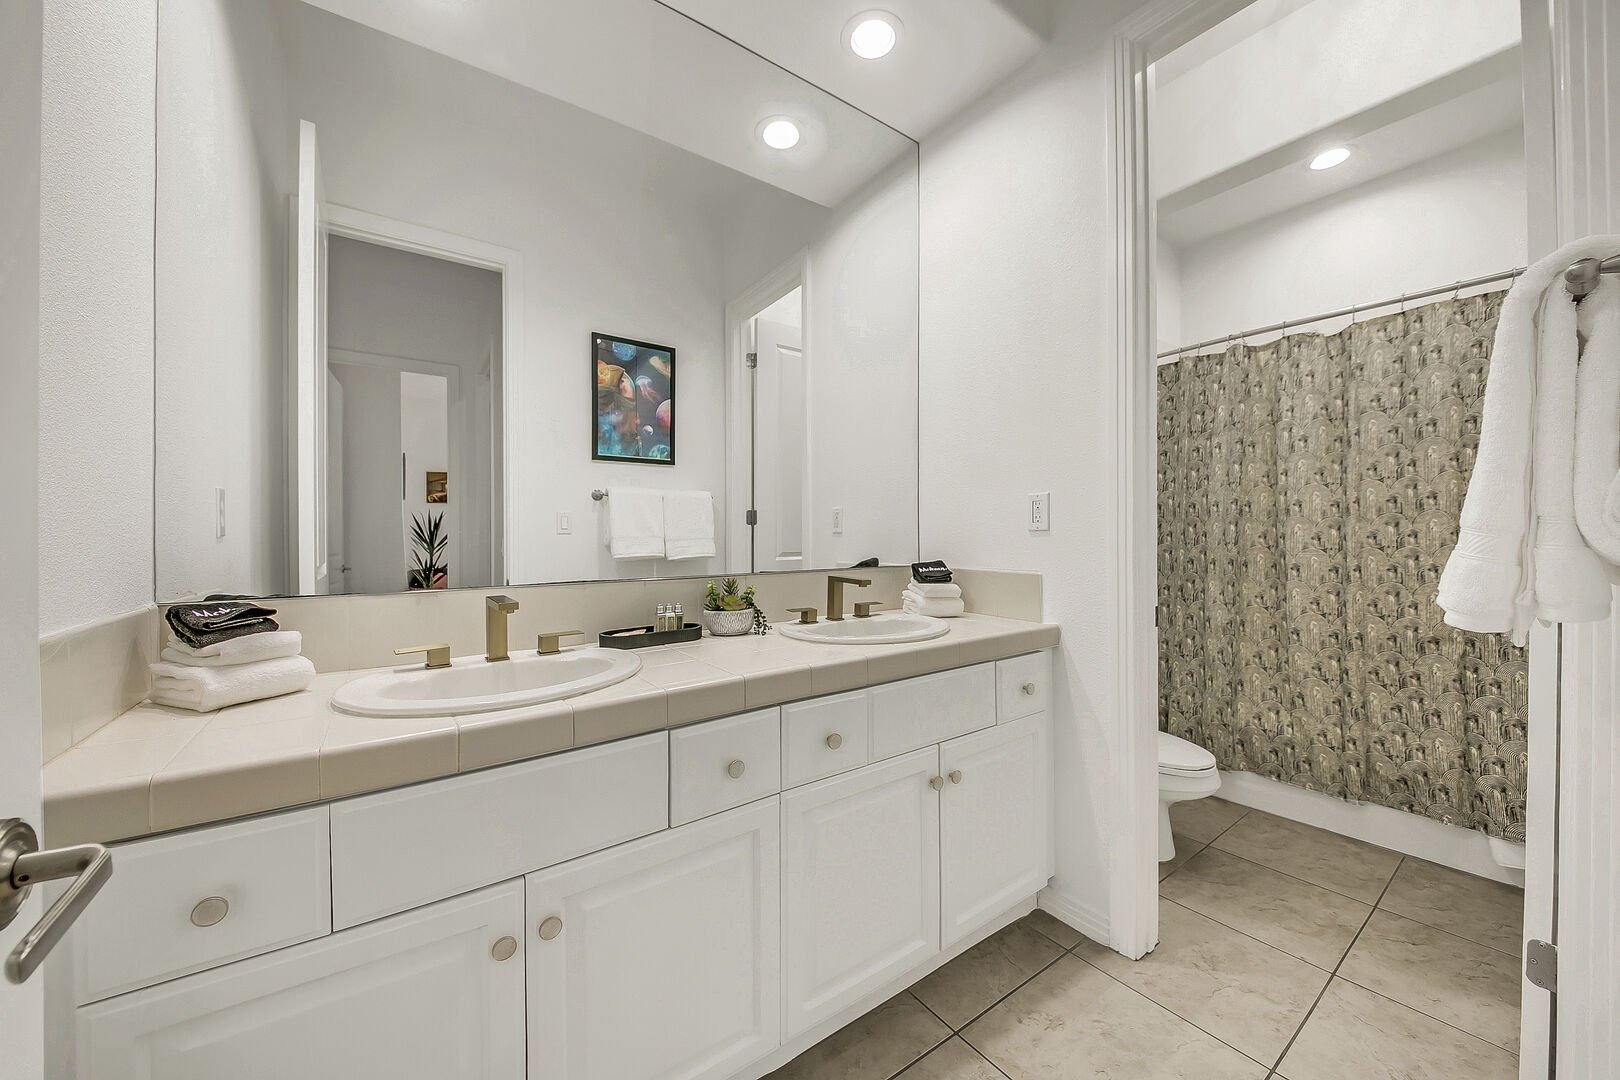 The hallway bathroom features a bathtub and shower combo and two vanity sinks.